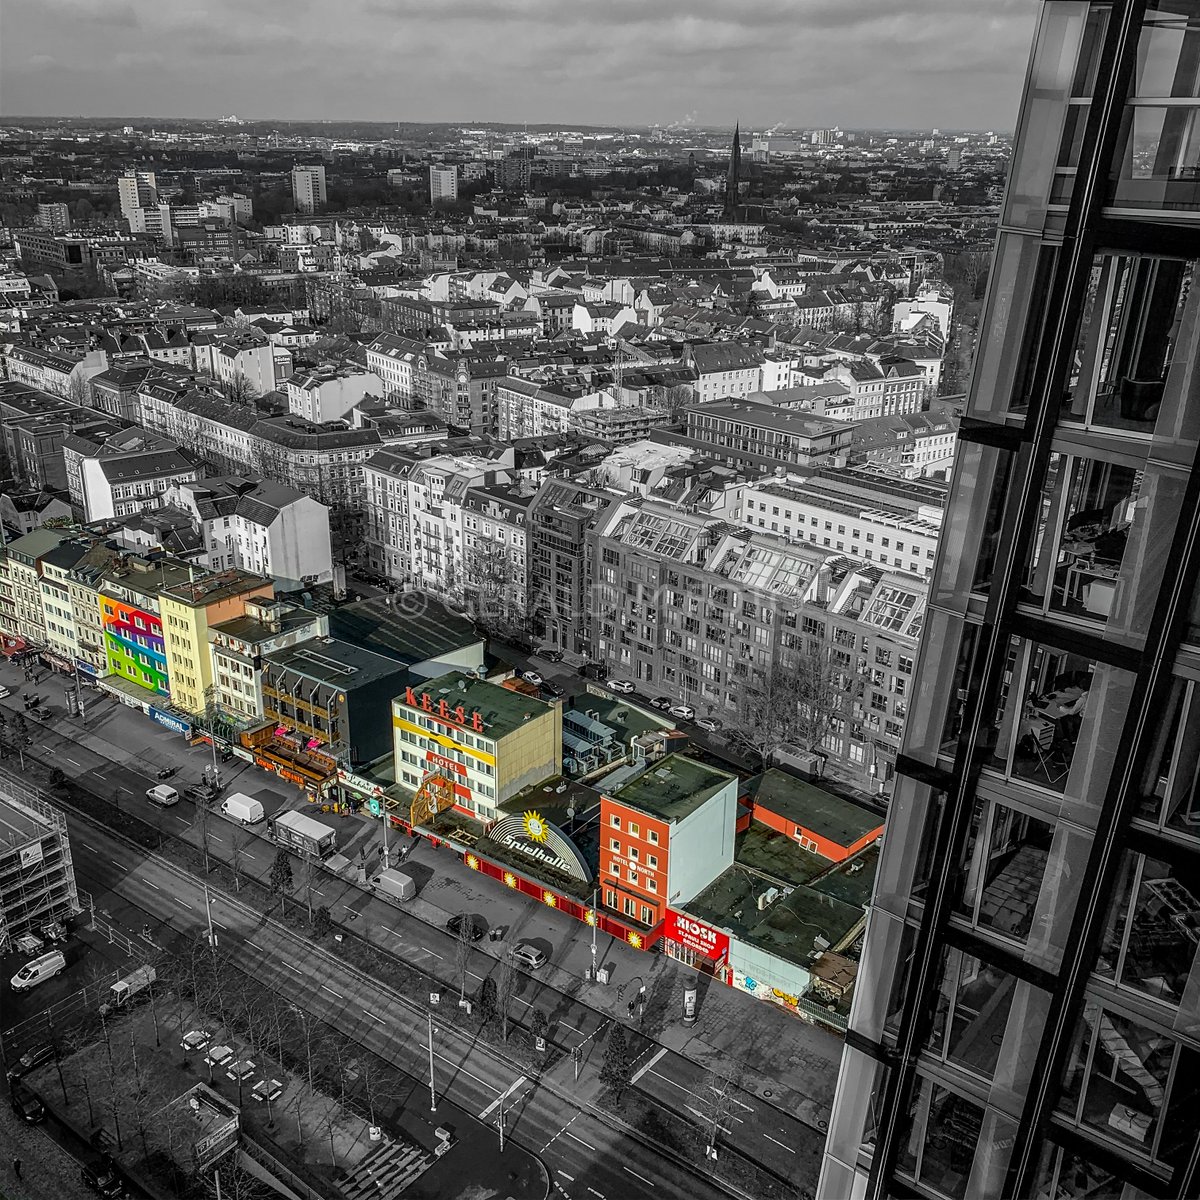 View from high above on #hamburg #stpauli #reeperbahn  for @clr_collective #colour_collective #PrimroseYellowPale
#selectivecolor #ilovehh #coloursplash #bnwsplash #bnwphotography #streetphotography #cityscape #architecture #streetphoto #urbanexplorers #shotoniphone @ProCamera